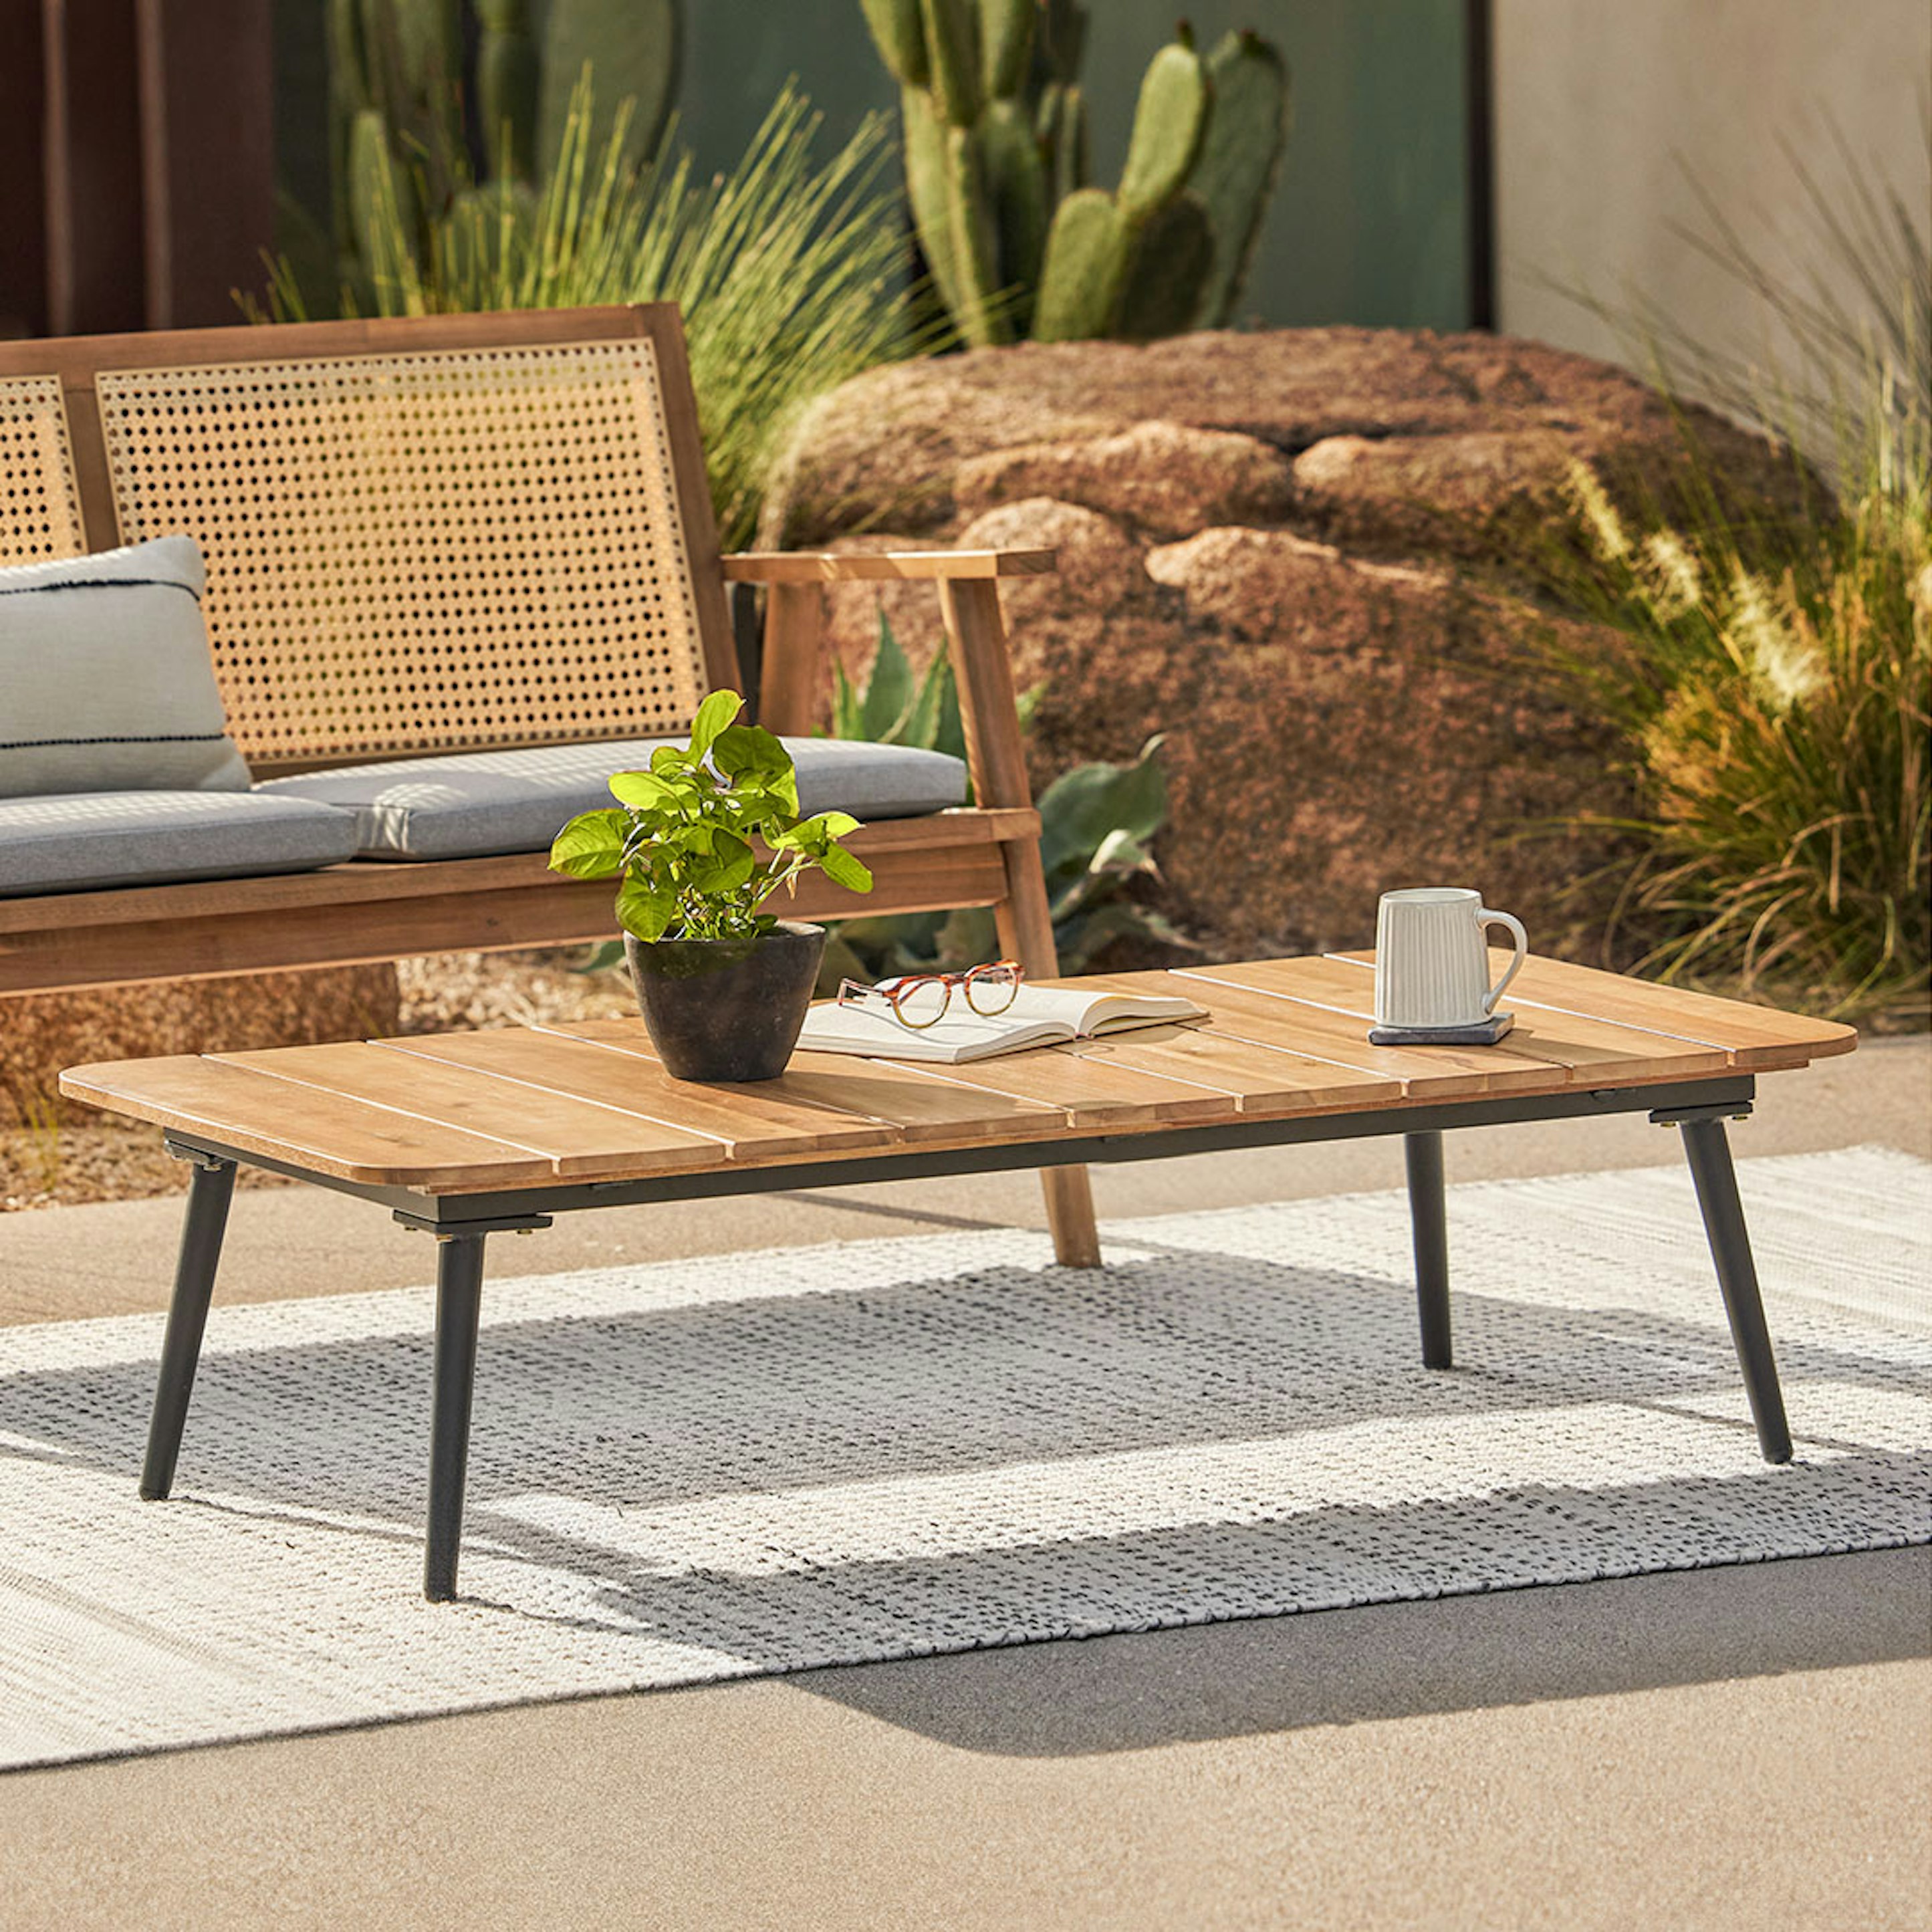 Slate Gray Outdoor Wooden Coffee Table | Latta | Article